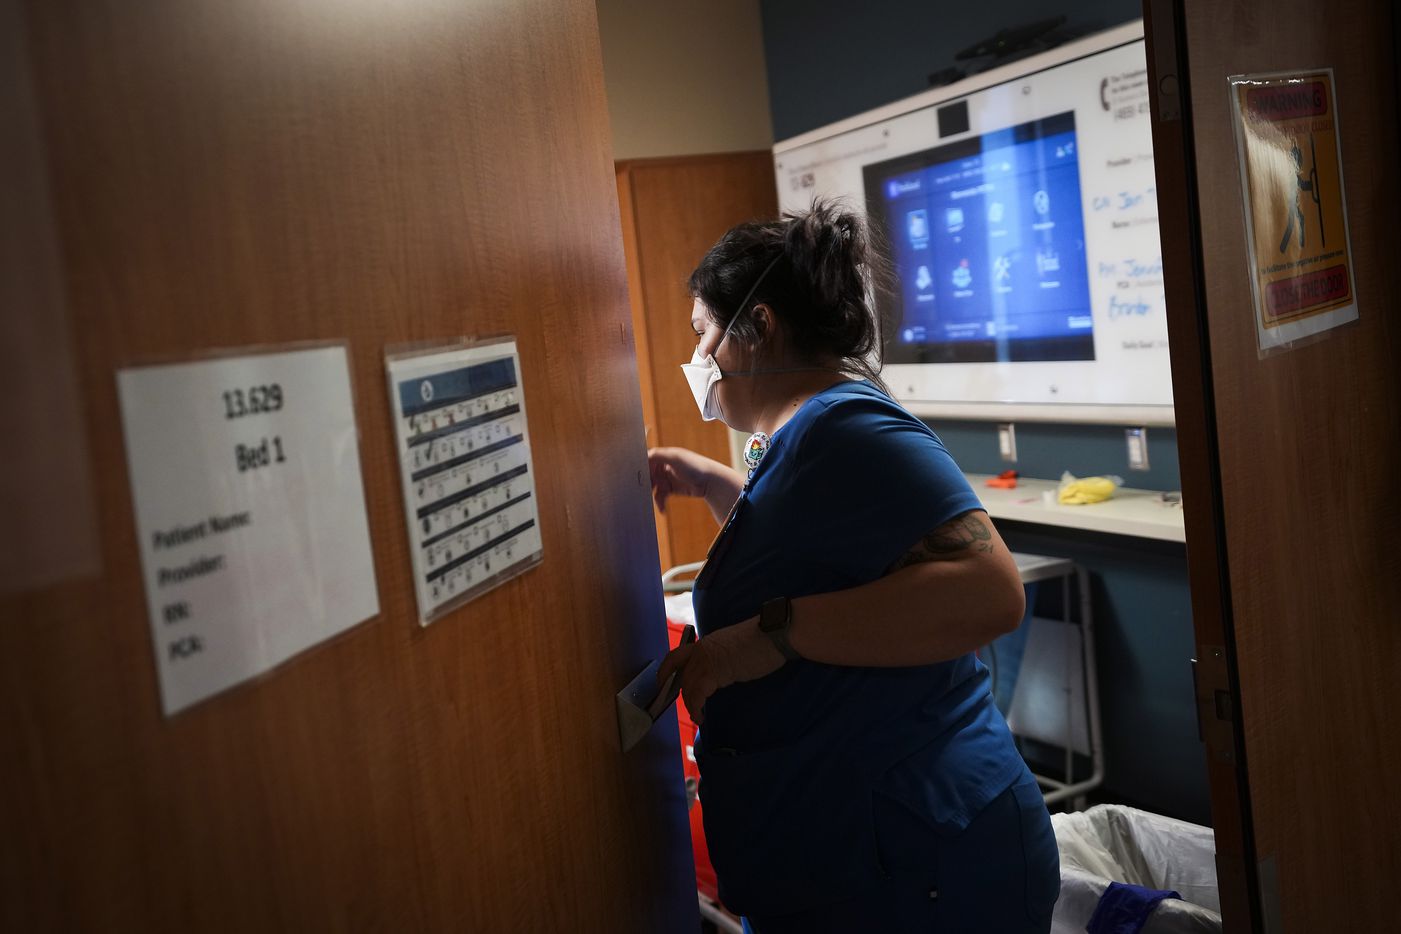 Nurse resident Jaime Luna peeks through a doorway into a patient room in the COVID-19 unit.